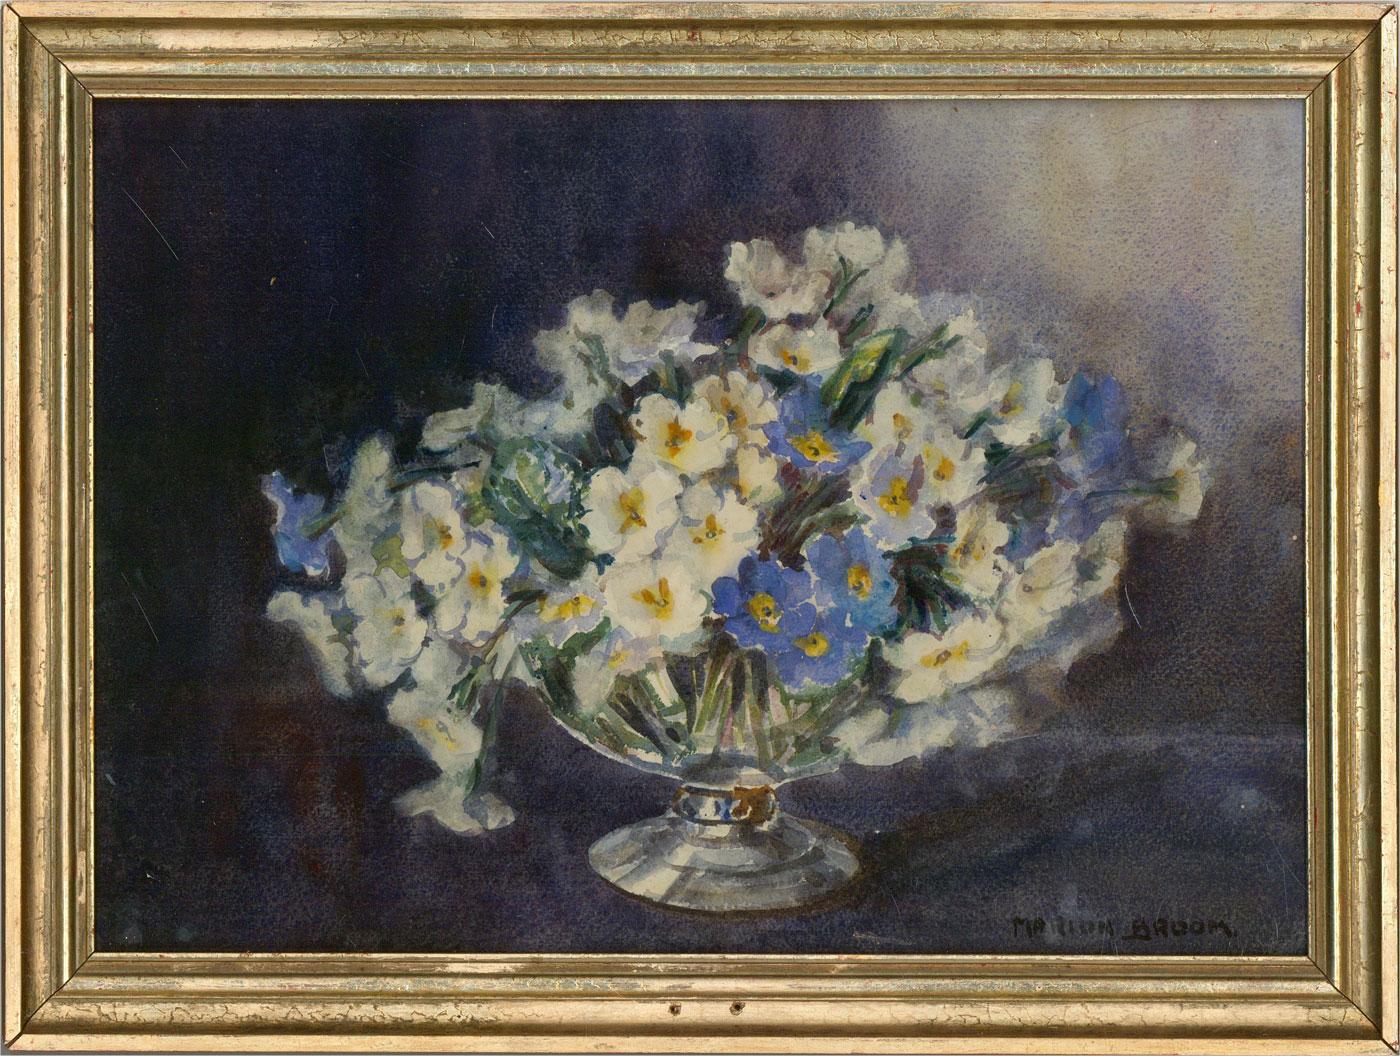 Marion Broom RWS (1878-1962) - Early 20th Century Watercolour, Vase of Flowers 1